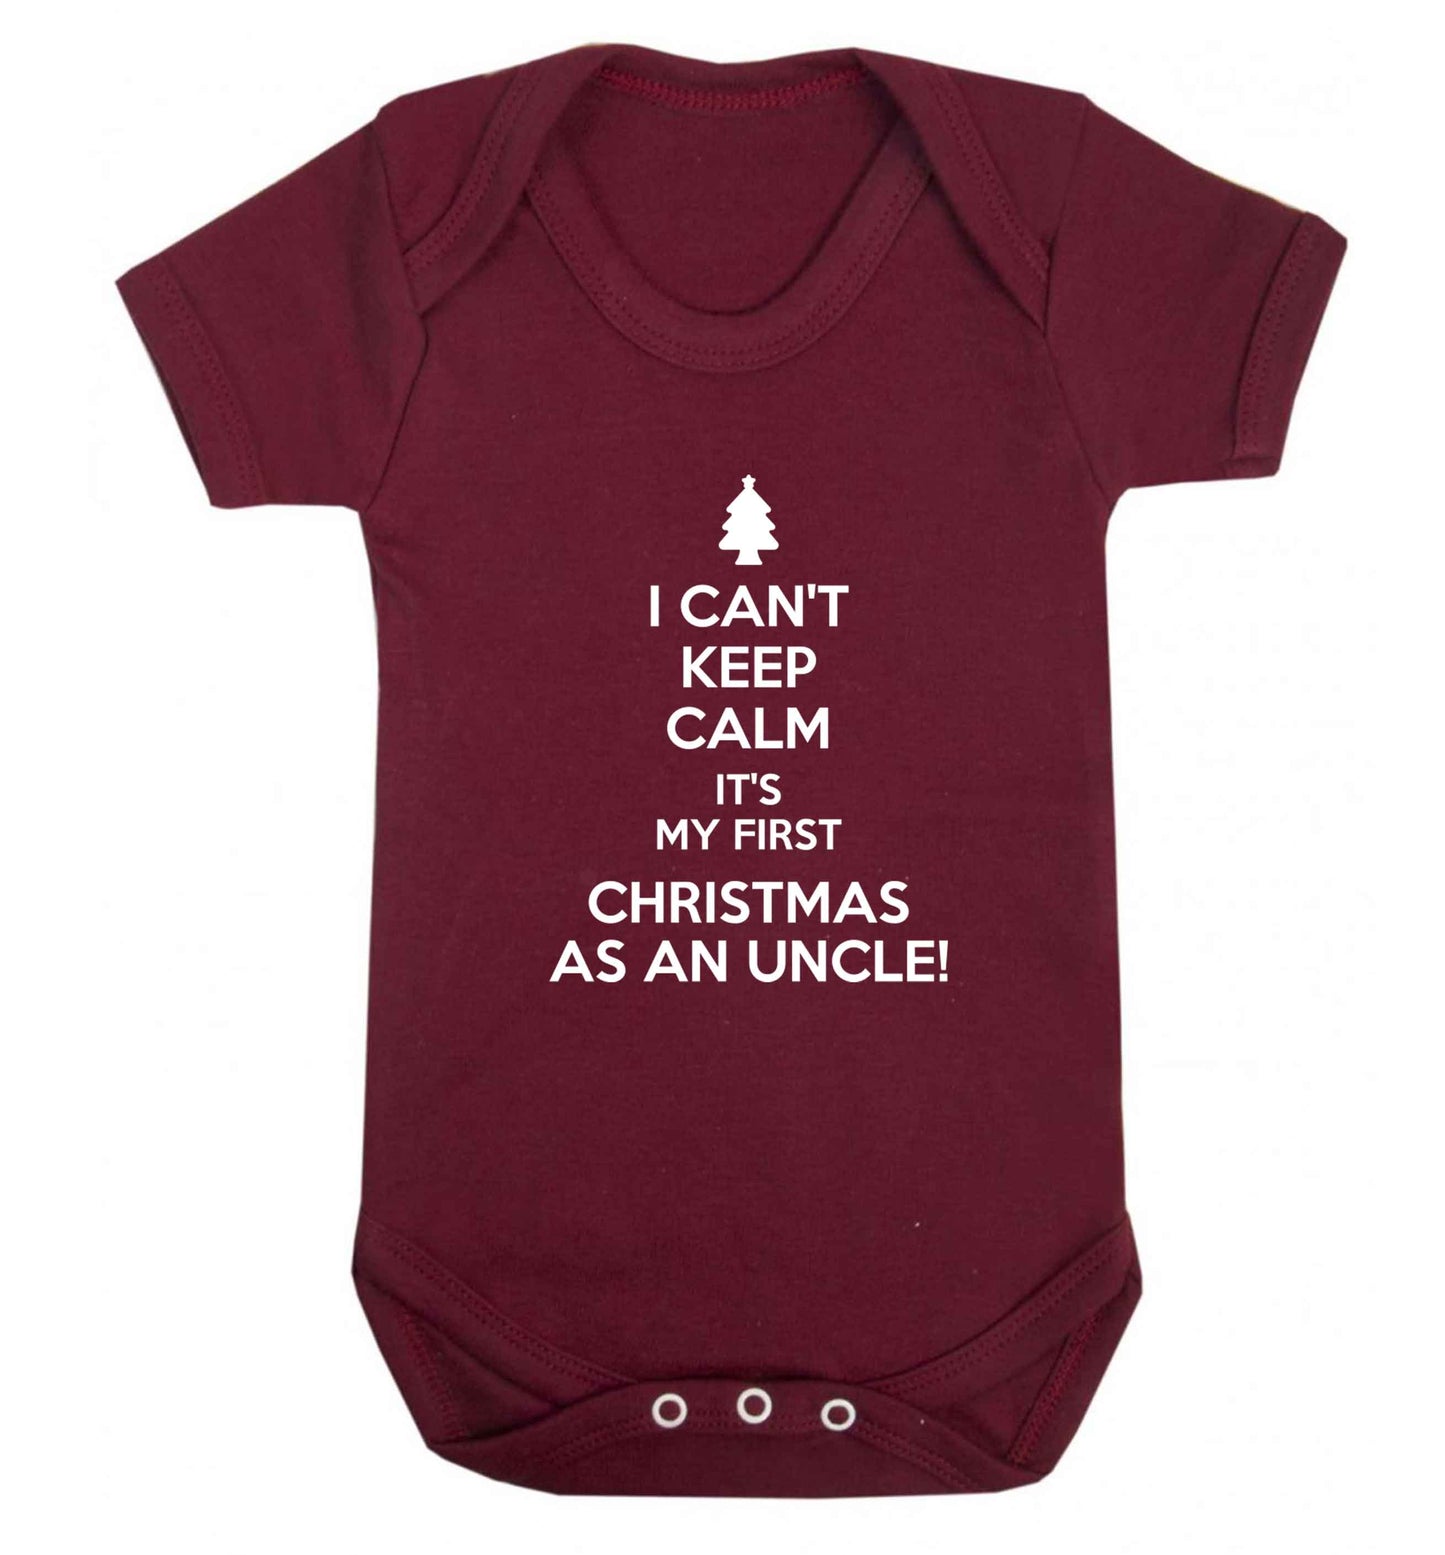 I can't keep calm it's my first Christmas as an uncle! Baby Vest maroon 18-24 months